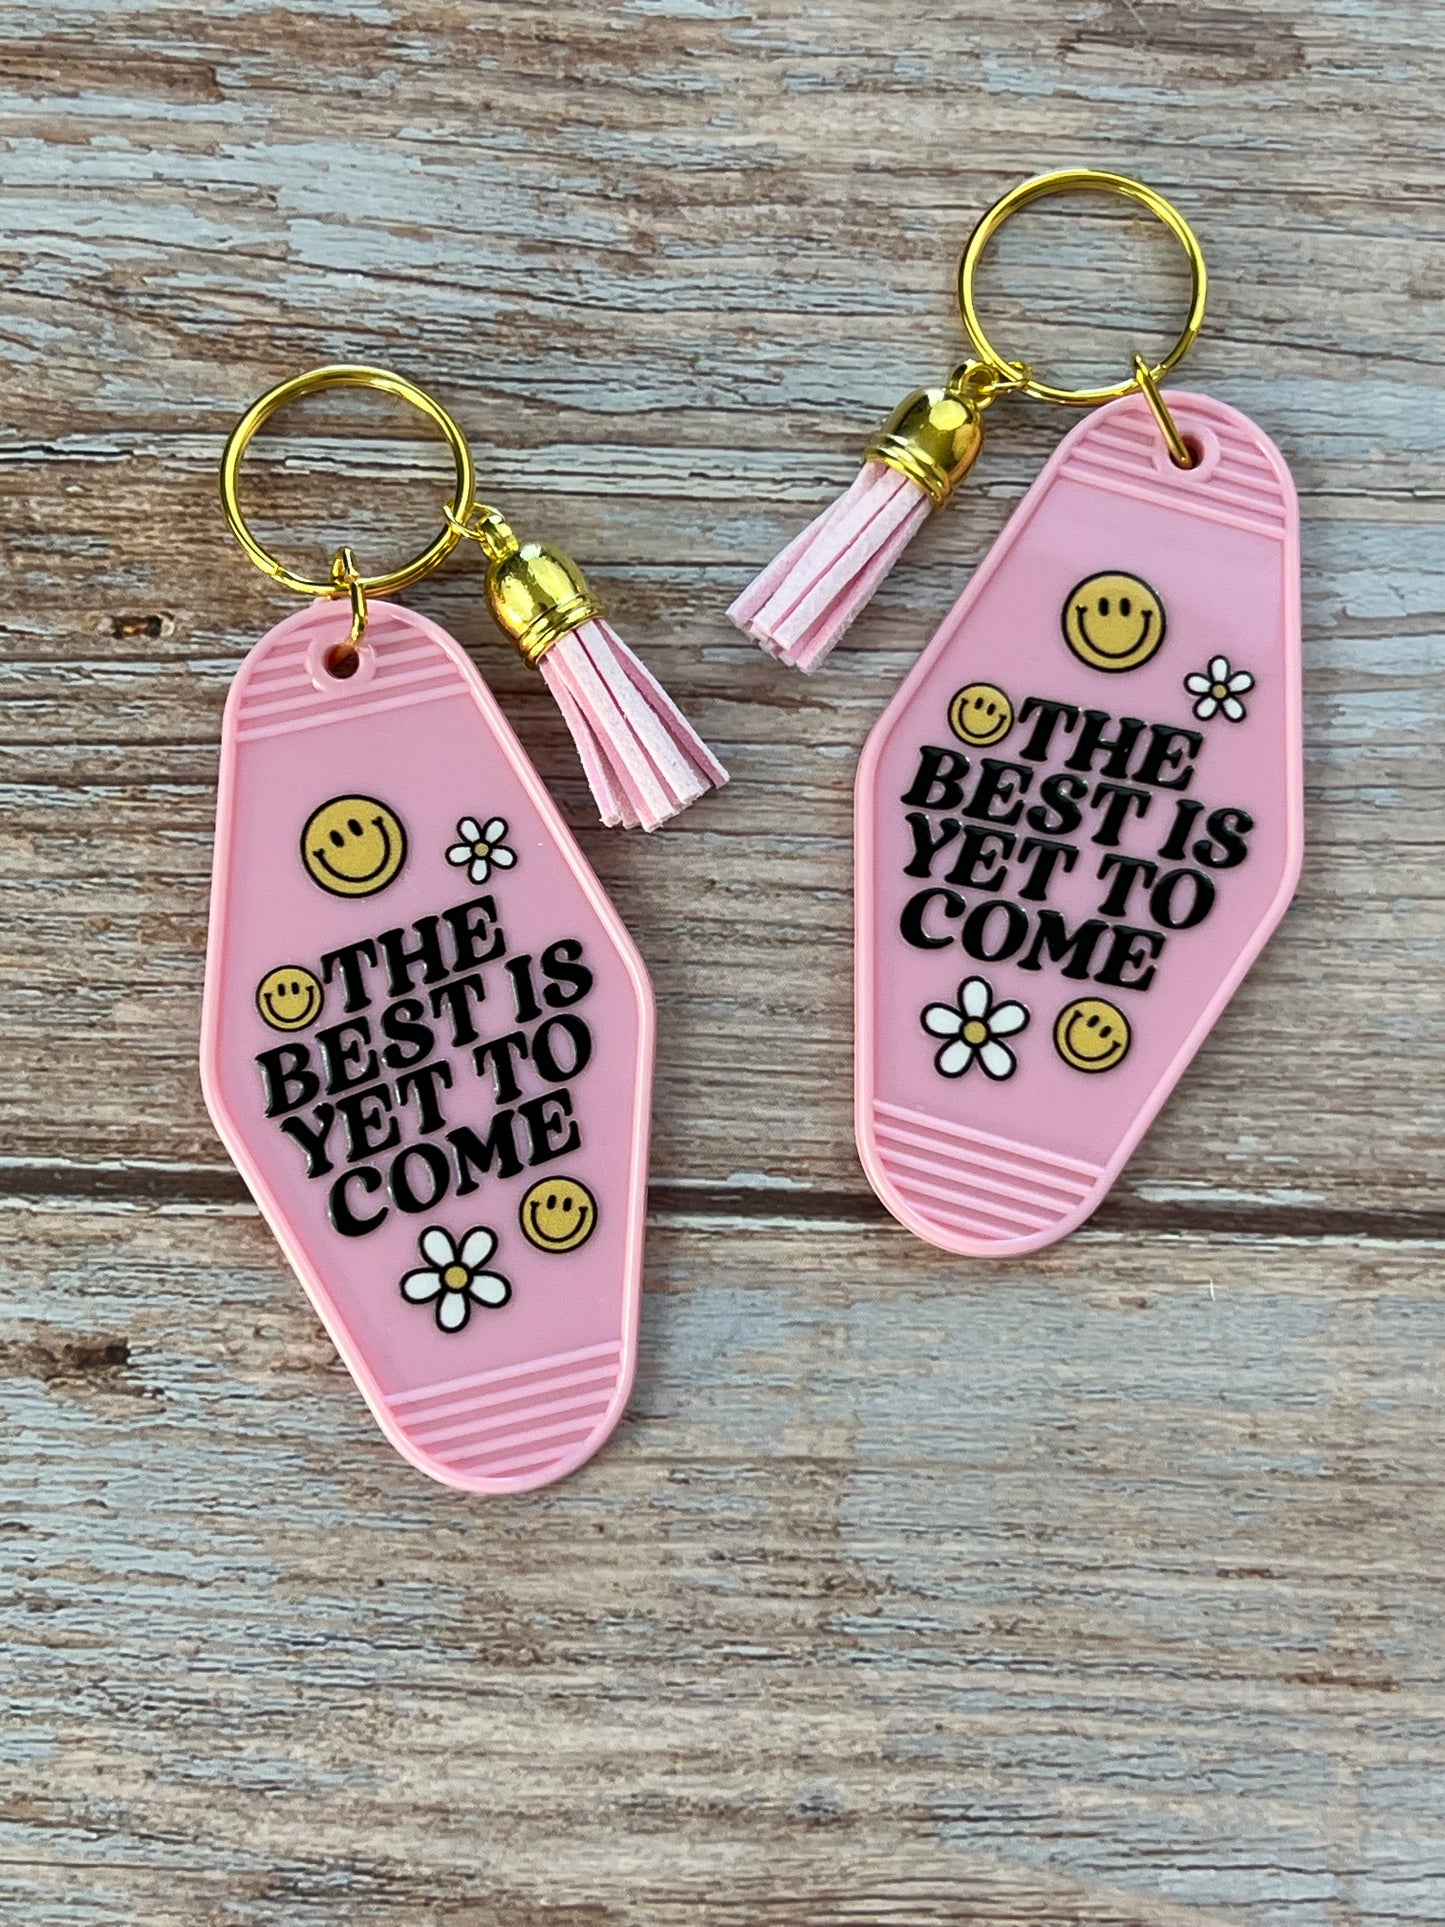 The Best Is Yet To Come Vintage Motel Keychain